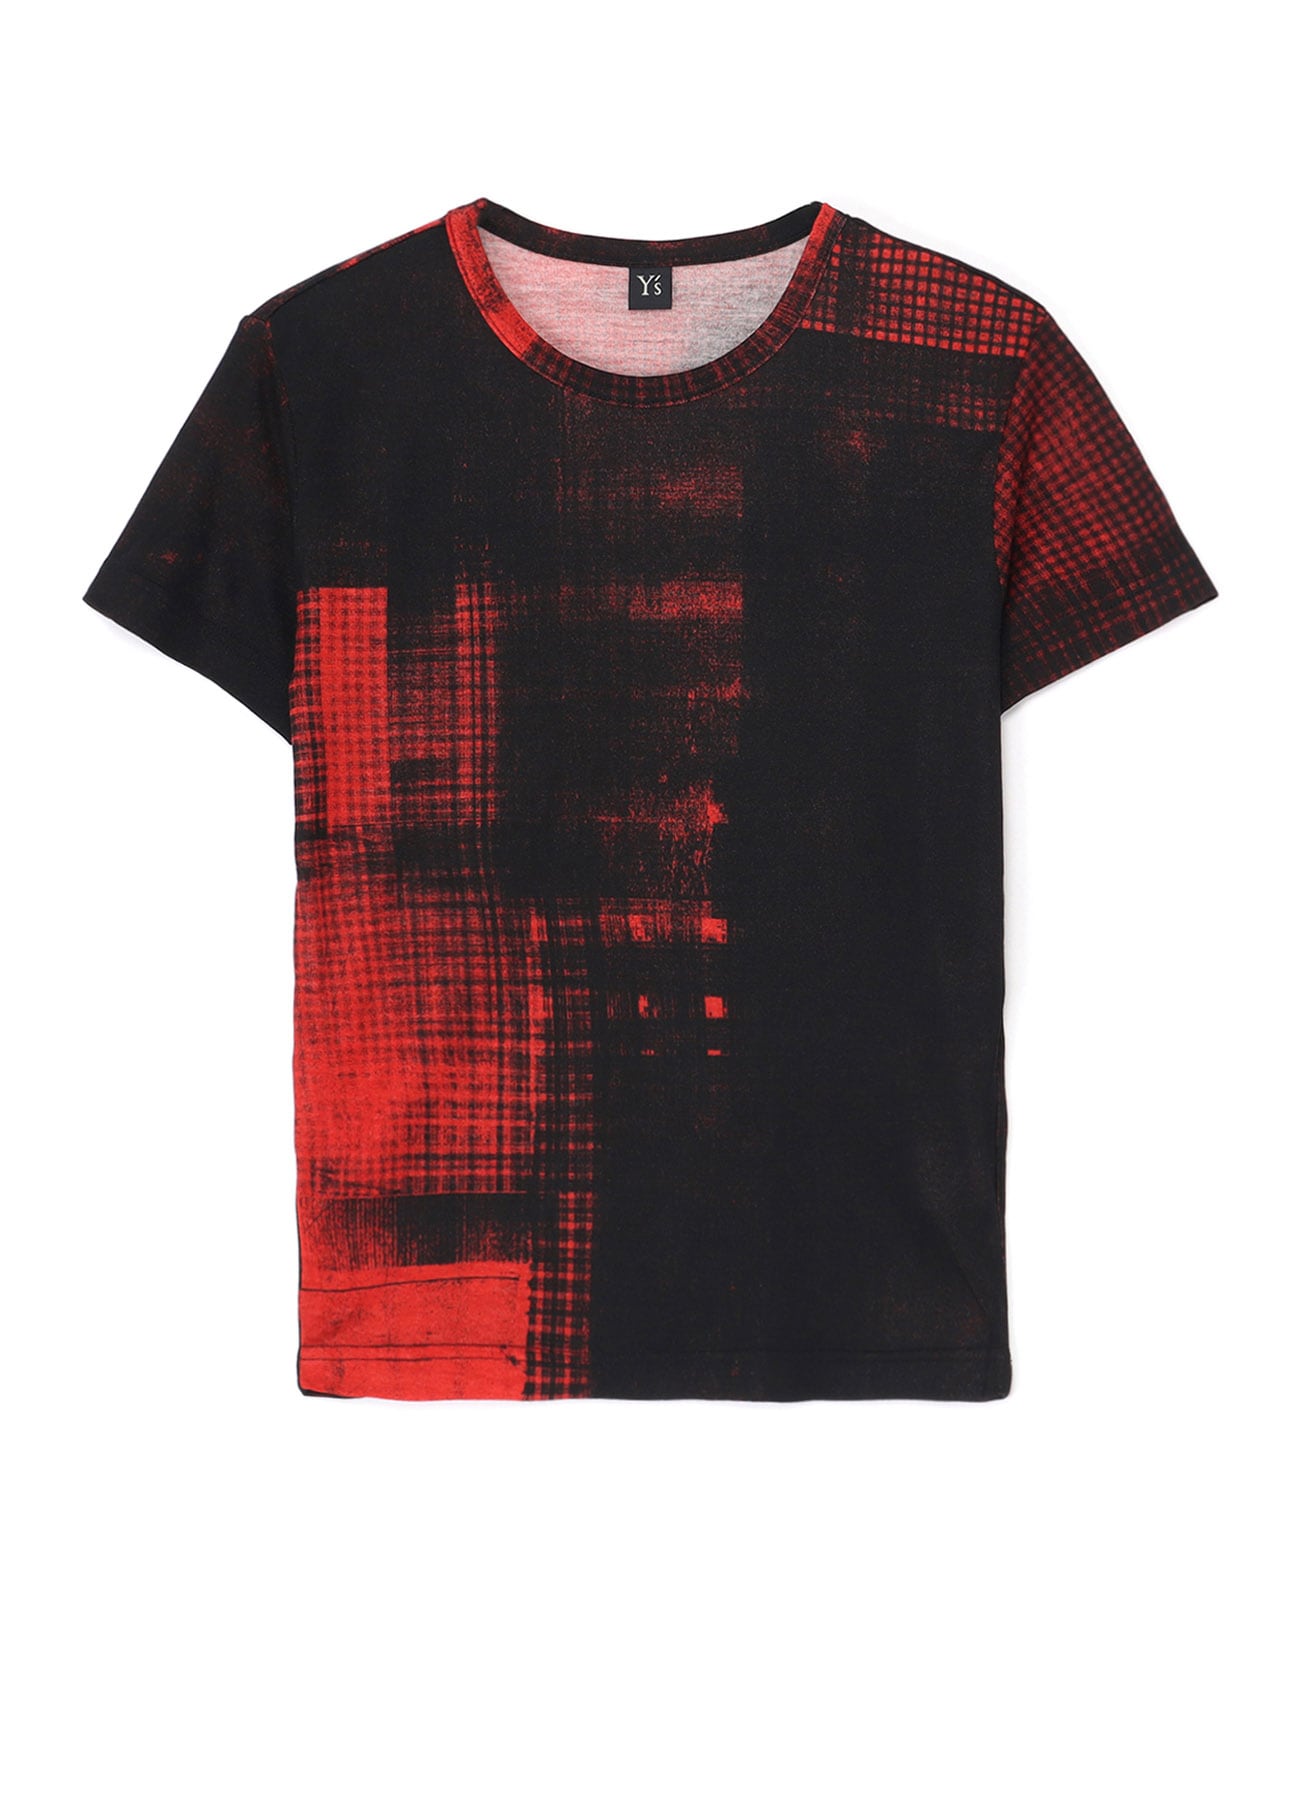 CHECKED PRINT ROUND NECK HALF SLEEVE T-SHIRT(S Red): Y's｜THE SHOP 